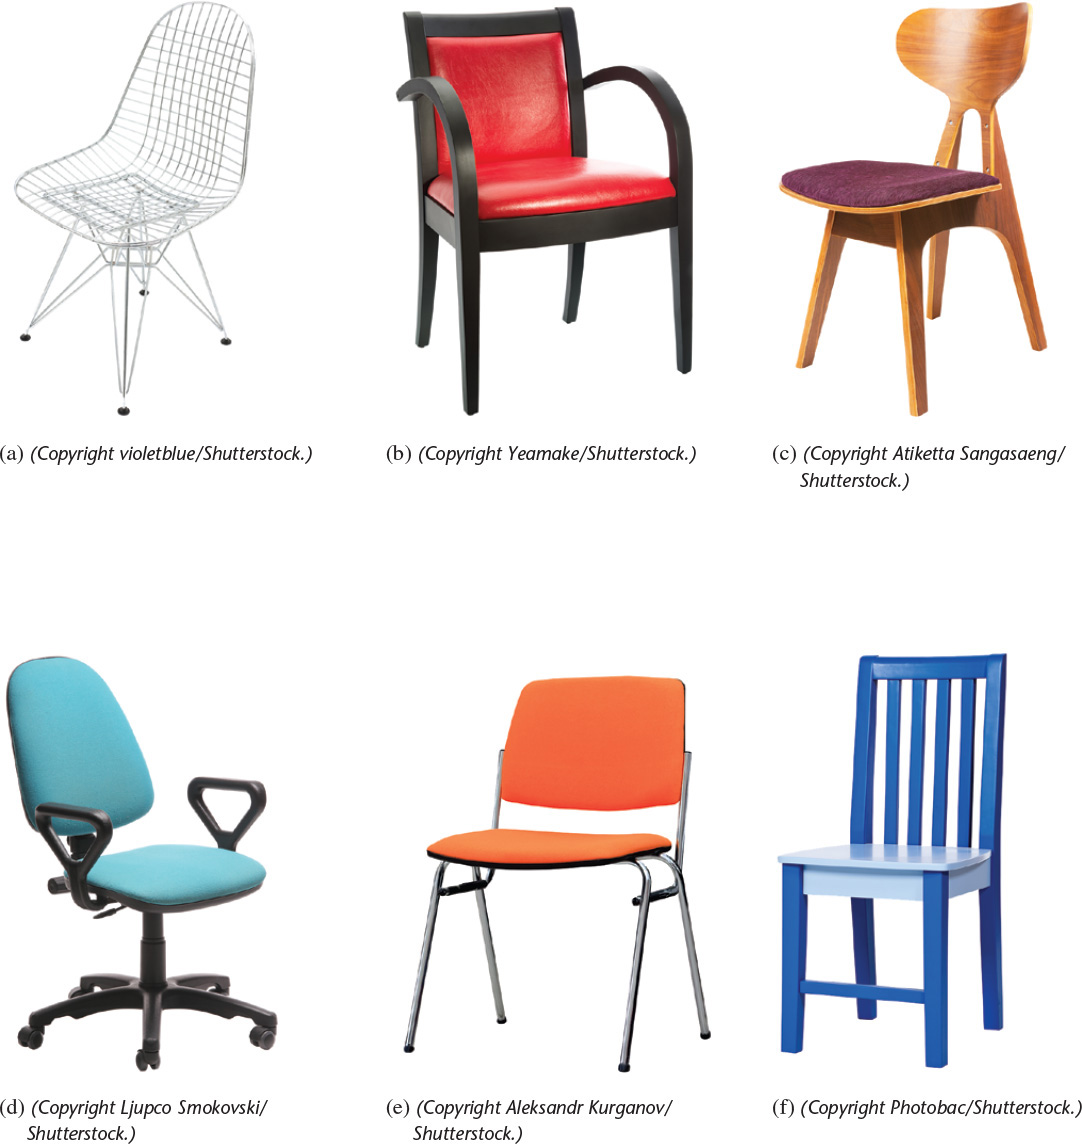 Photograph of five different types of chair.